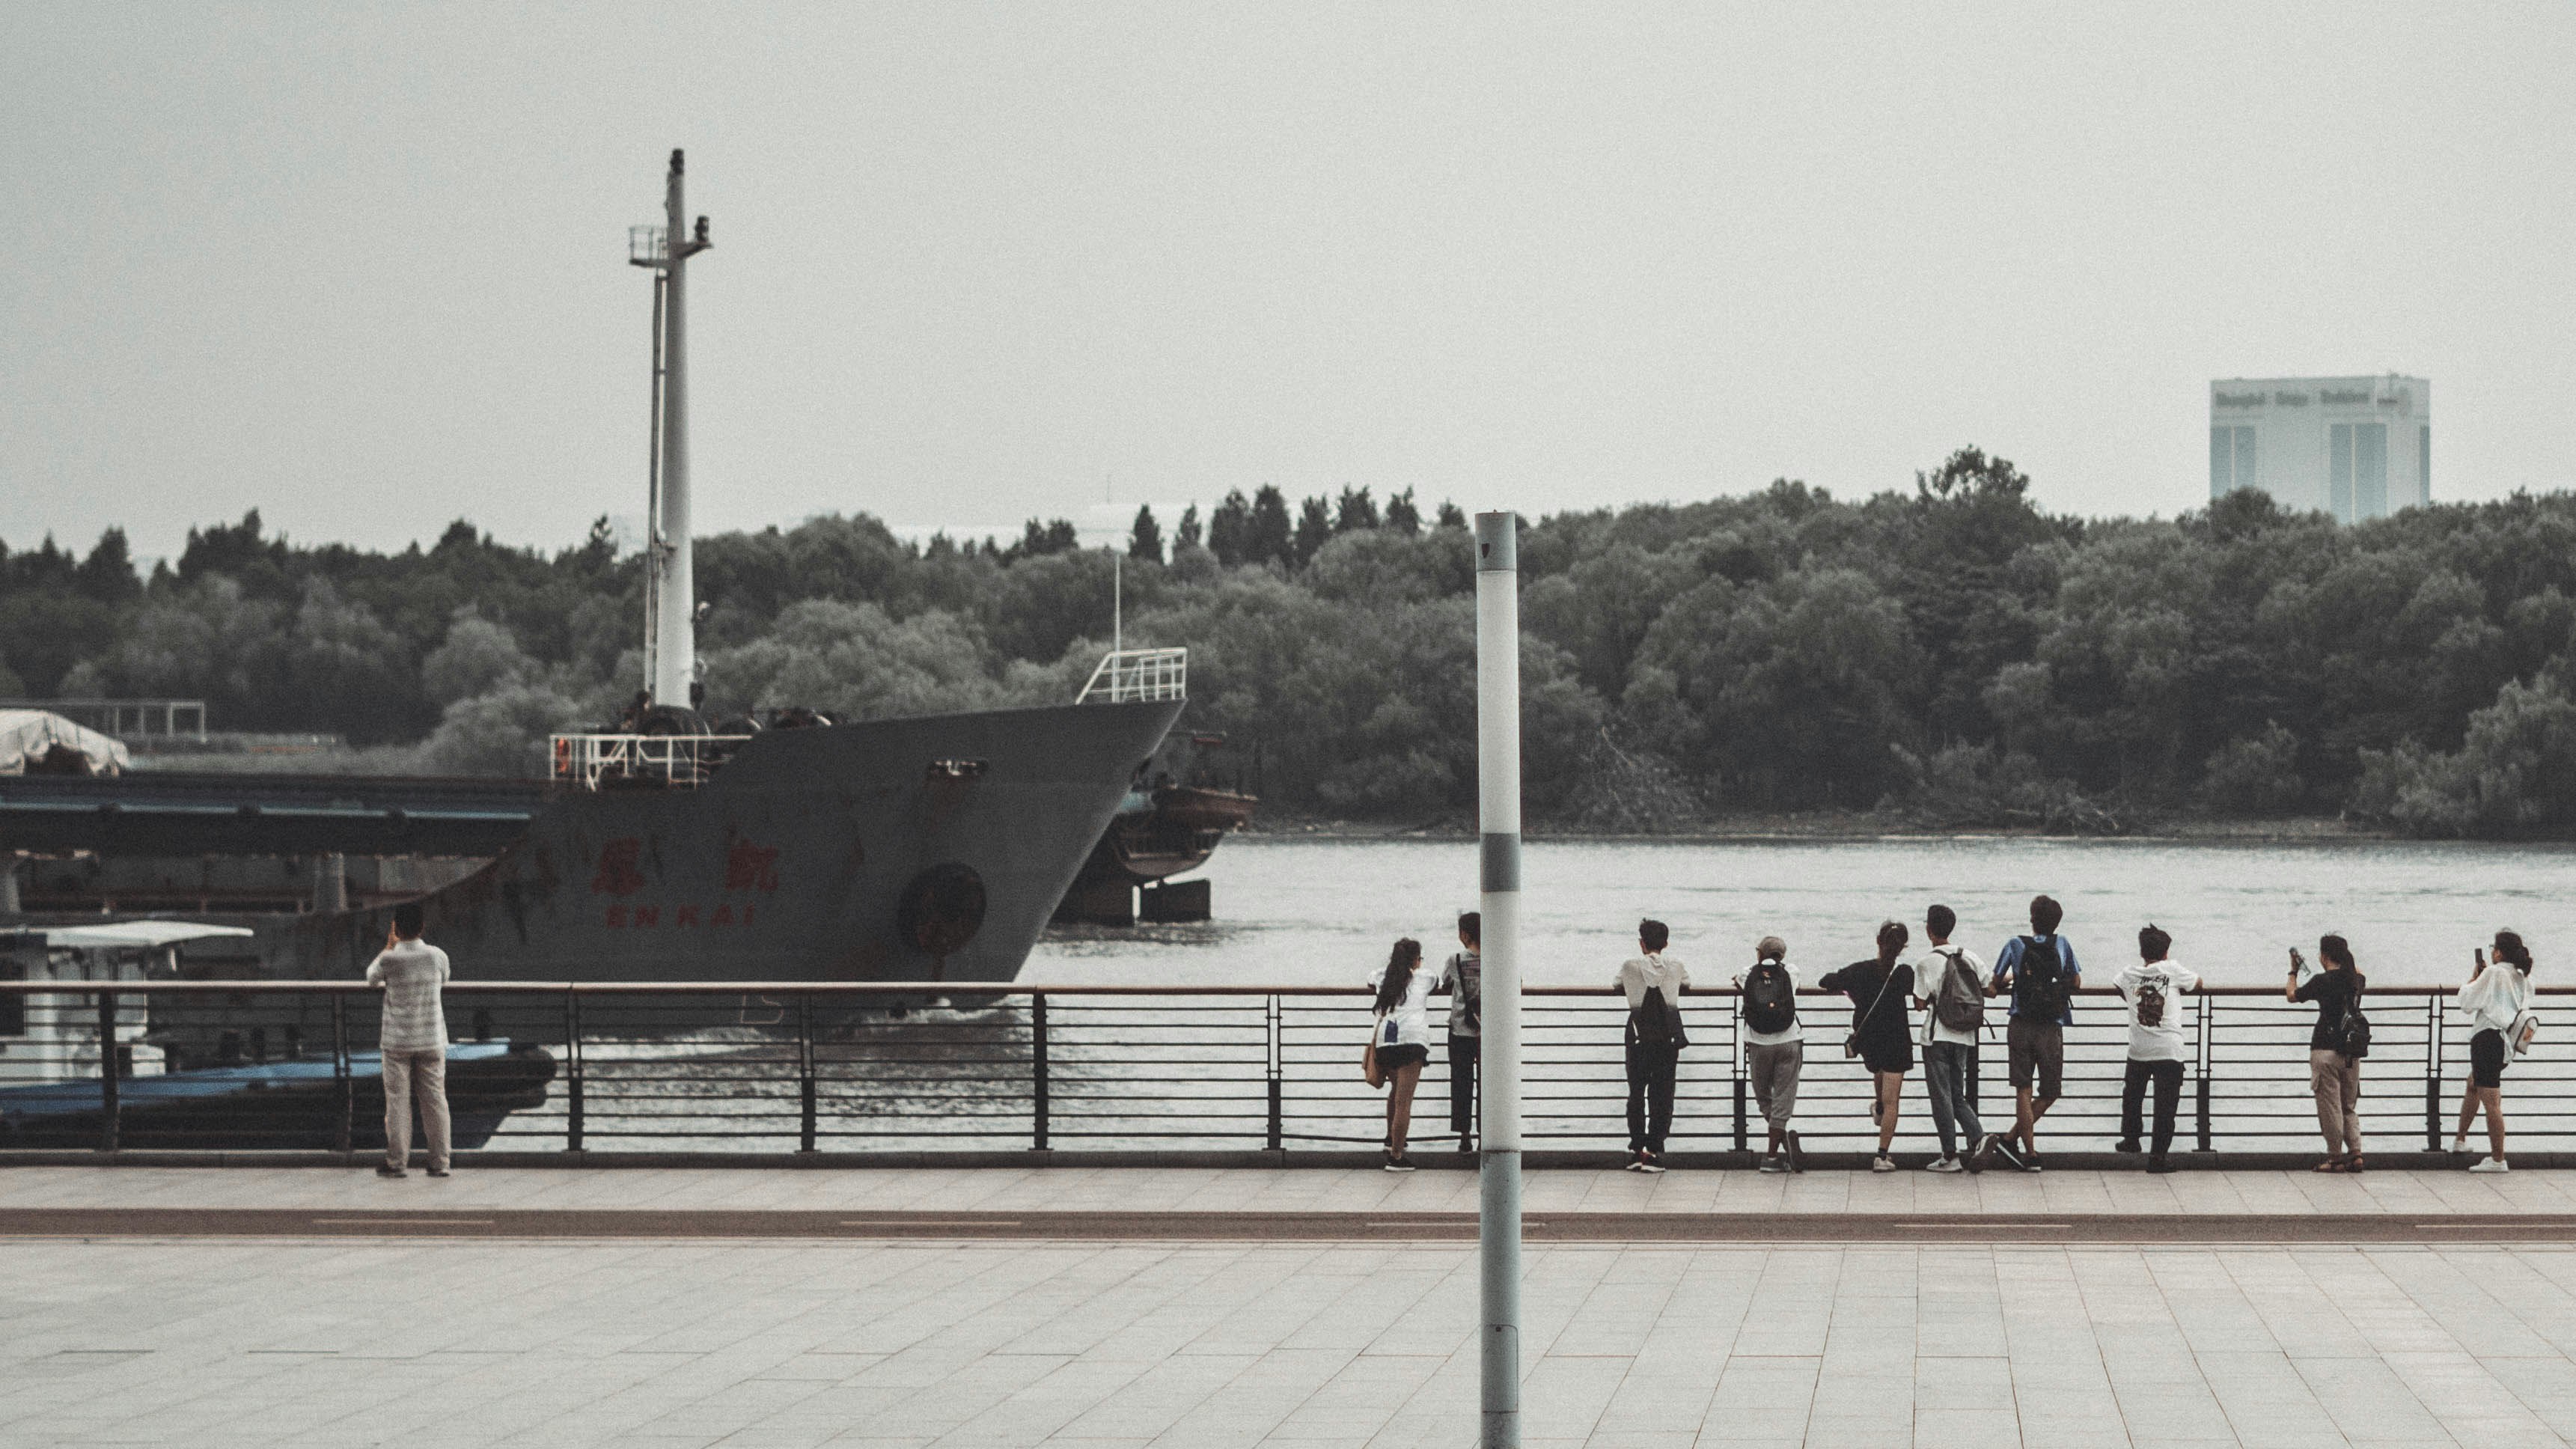 people standing on dock during daytime